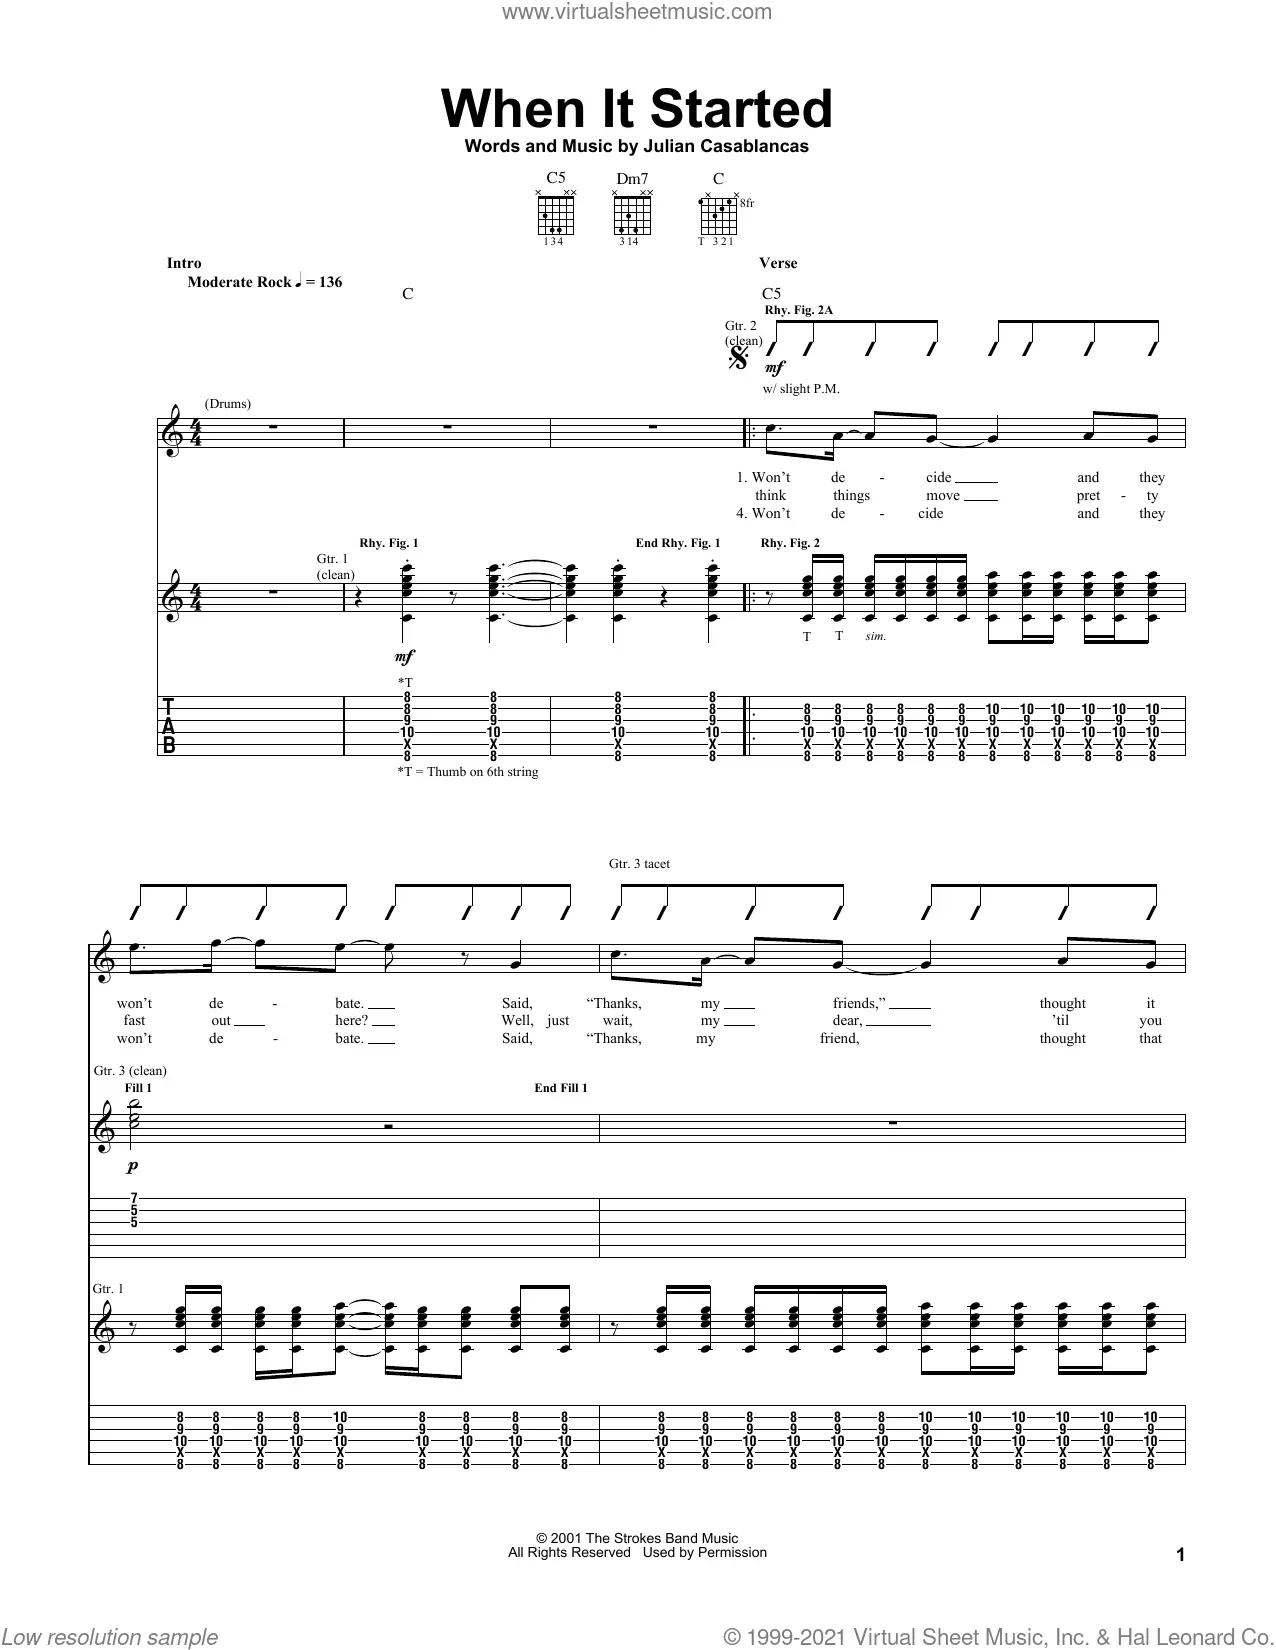 You Only Live Once by The Strokes Guitar Tab Digital Sheet Music